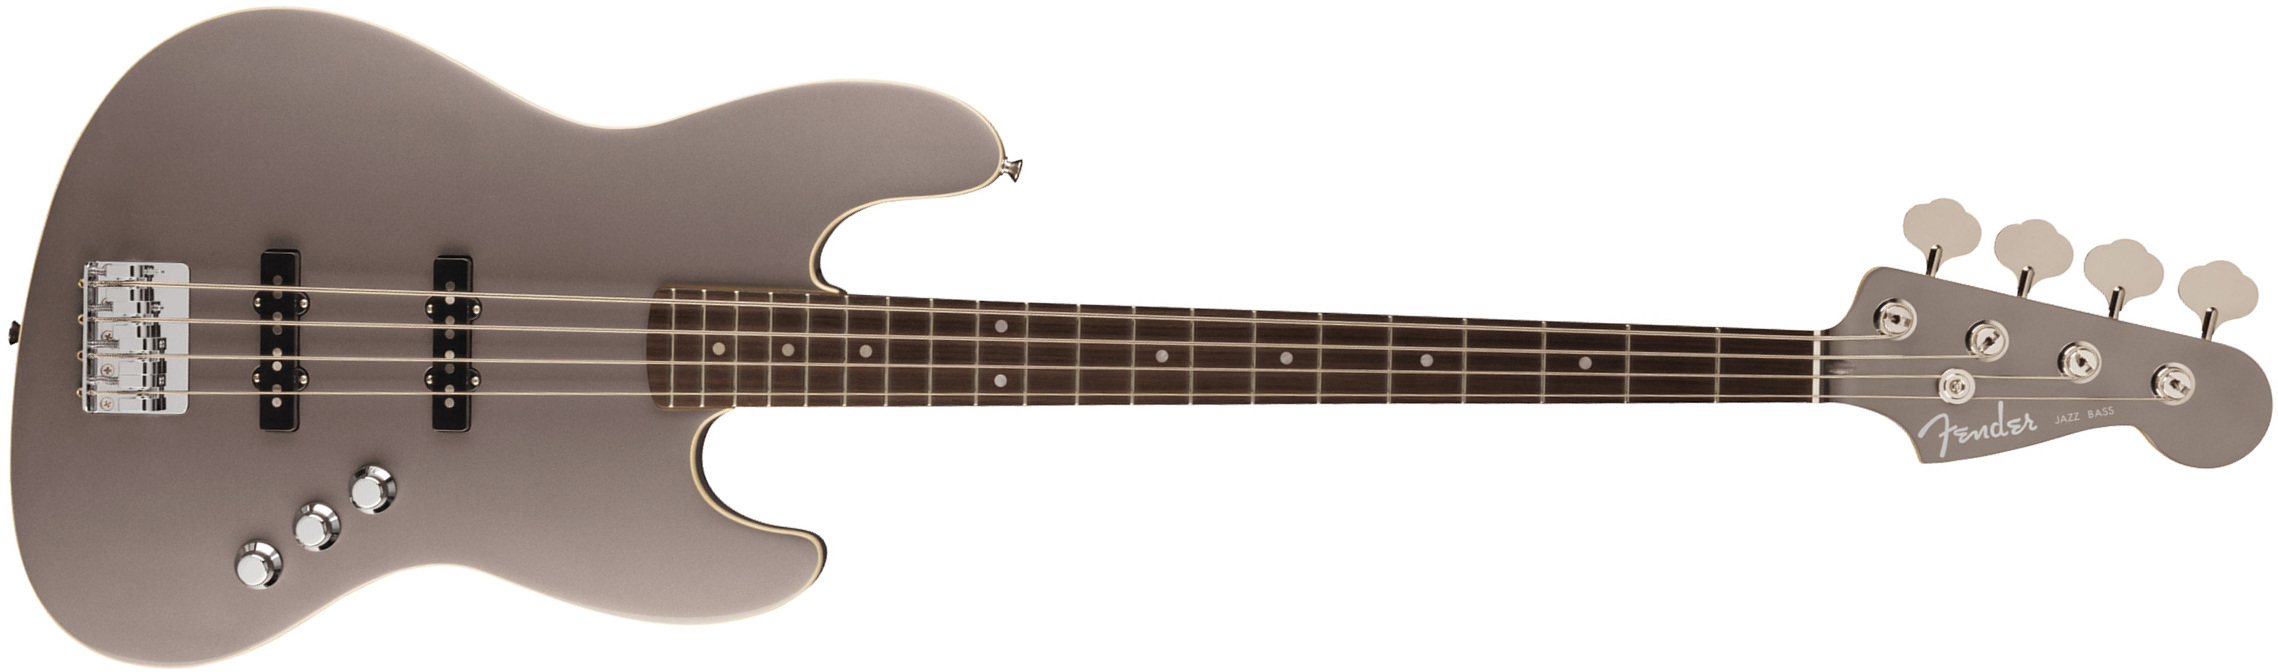 Fender Jazz Bass Aerodyne Special Jap Rw - Dolphin Gray Metallic - Basse Électrique Solid Body - Main picture